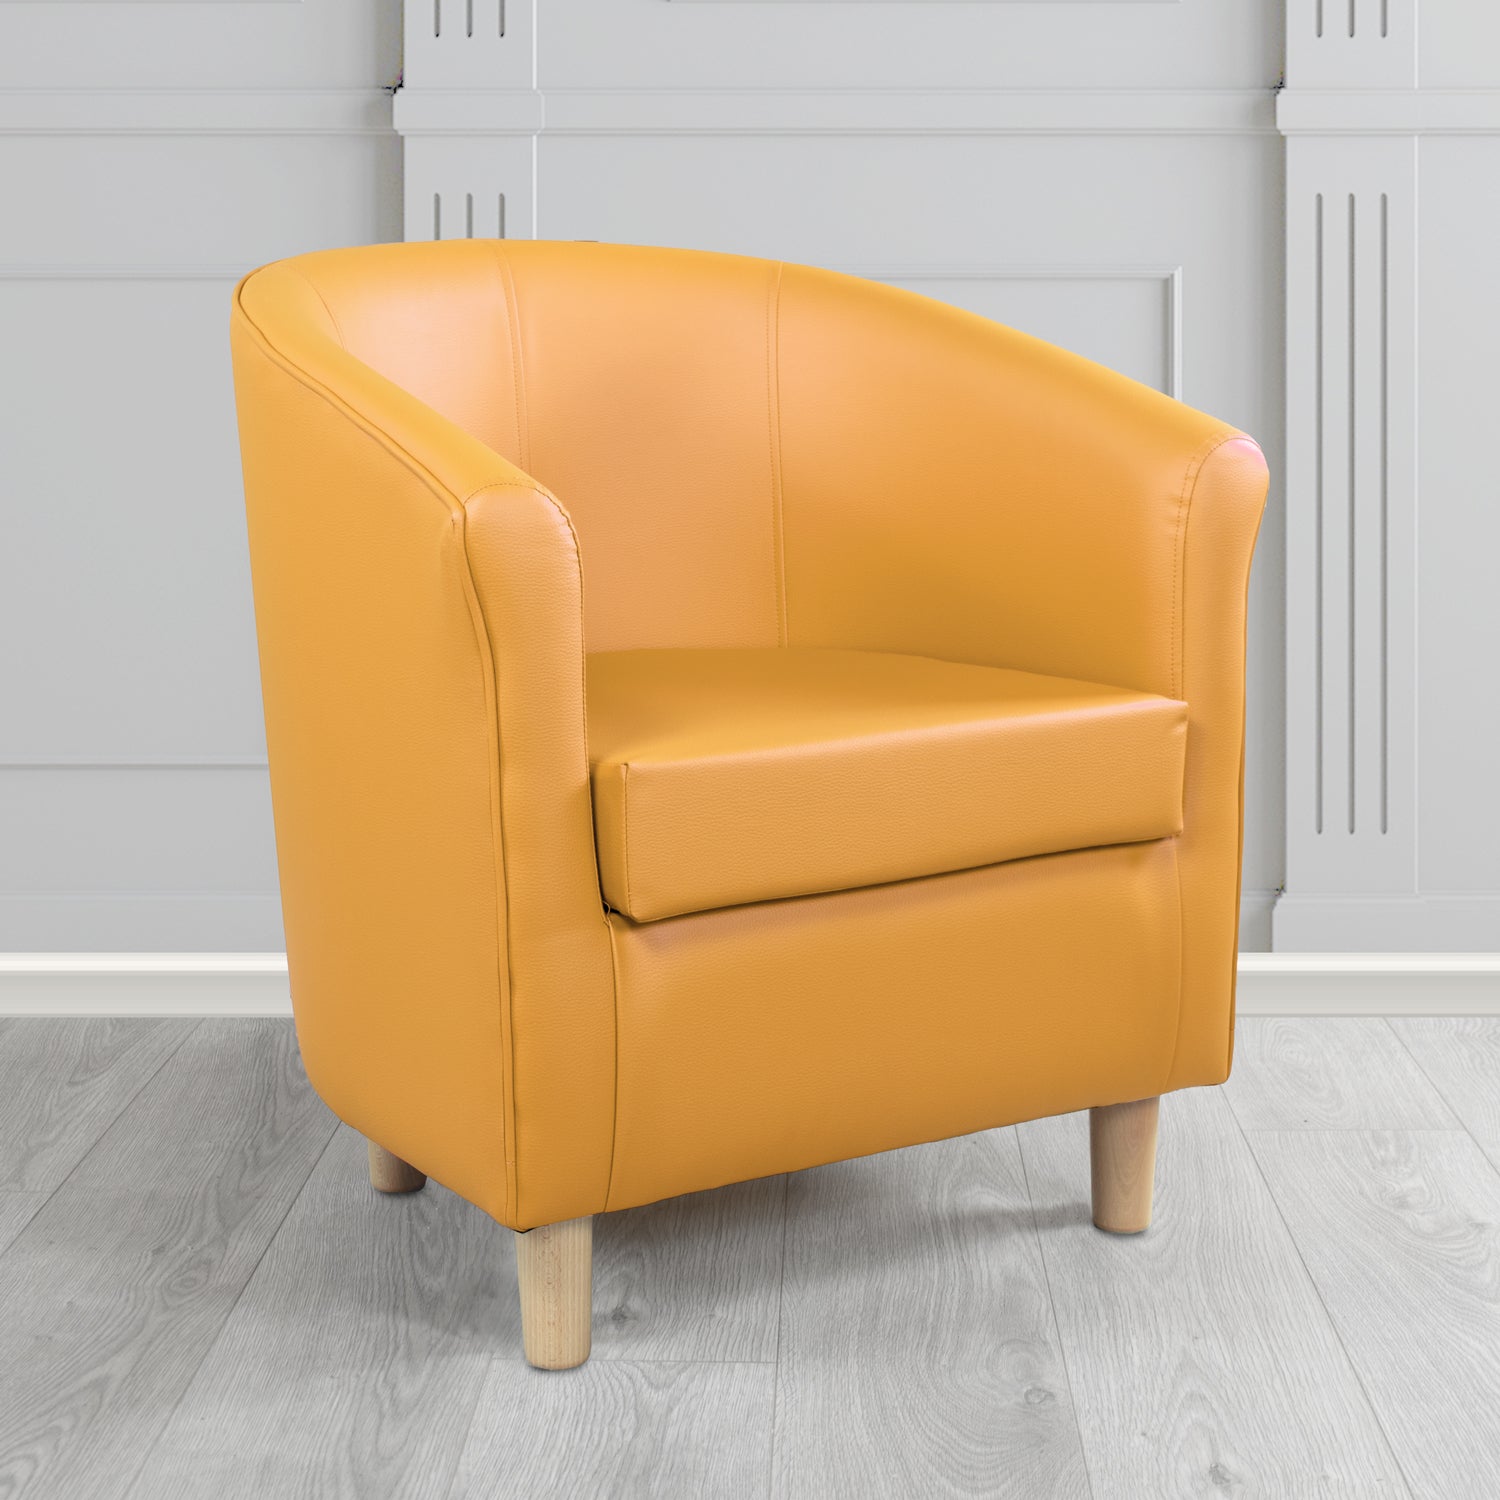 Tuscany Just Colour Sunblush Antimicrobial Crib 5 Contract Faux Leather Tub Chair